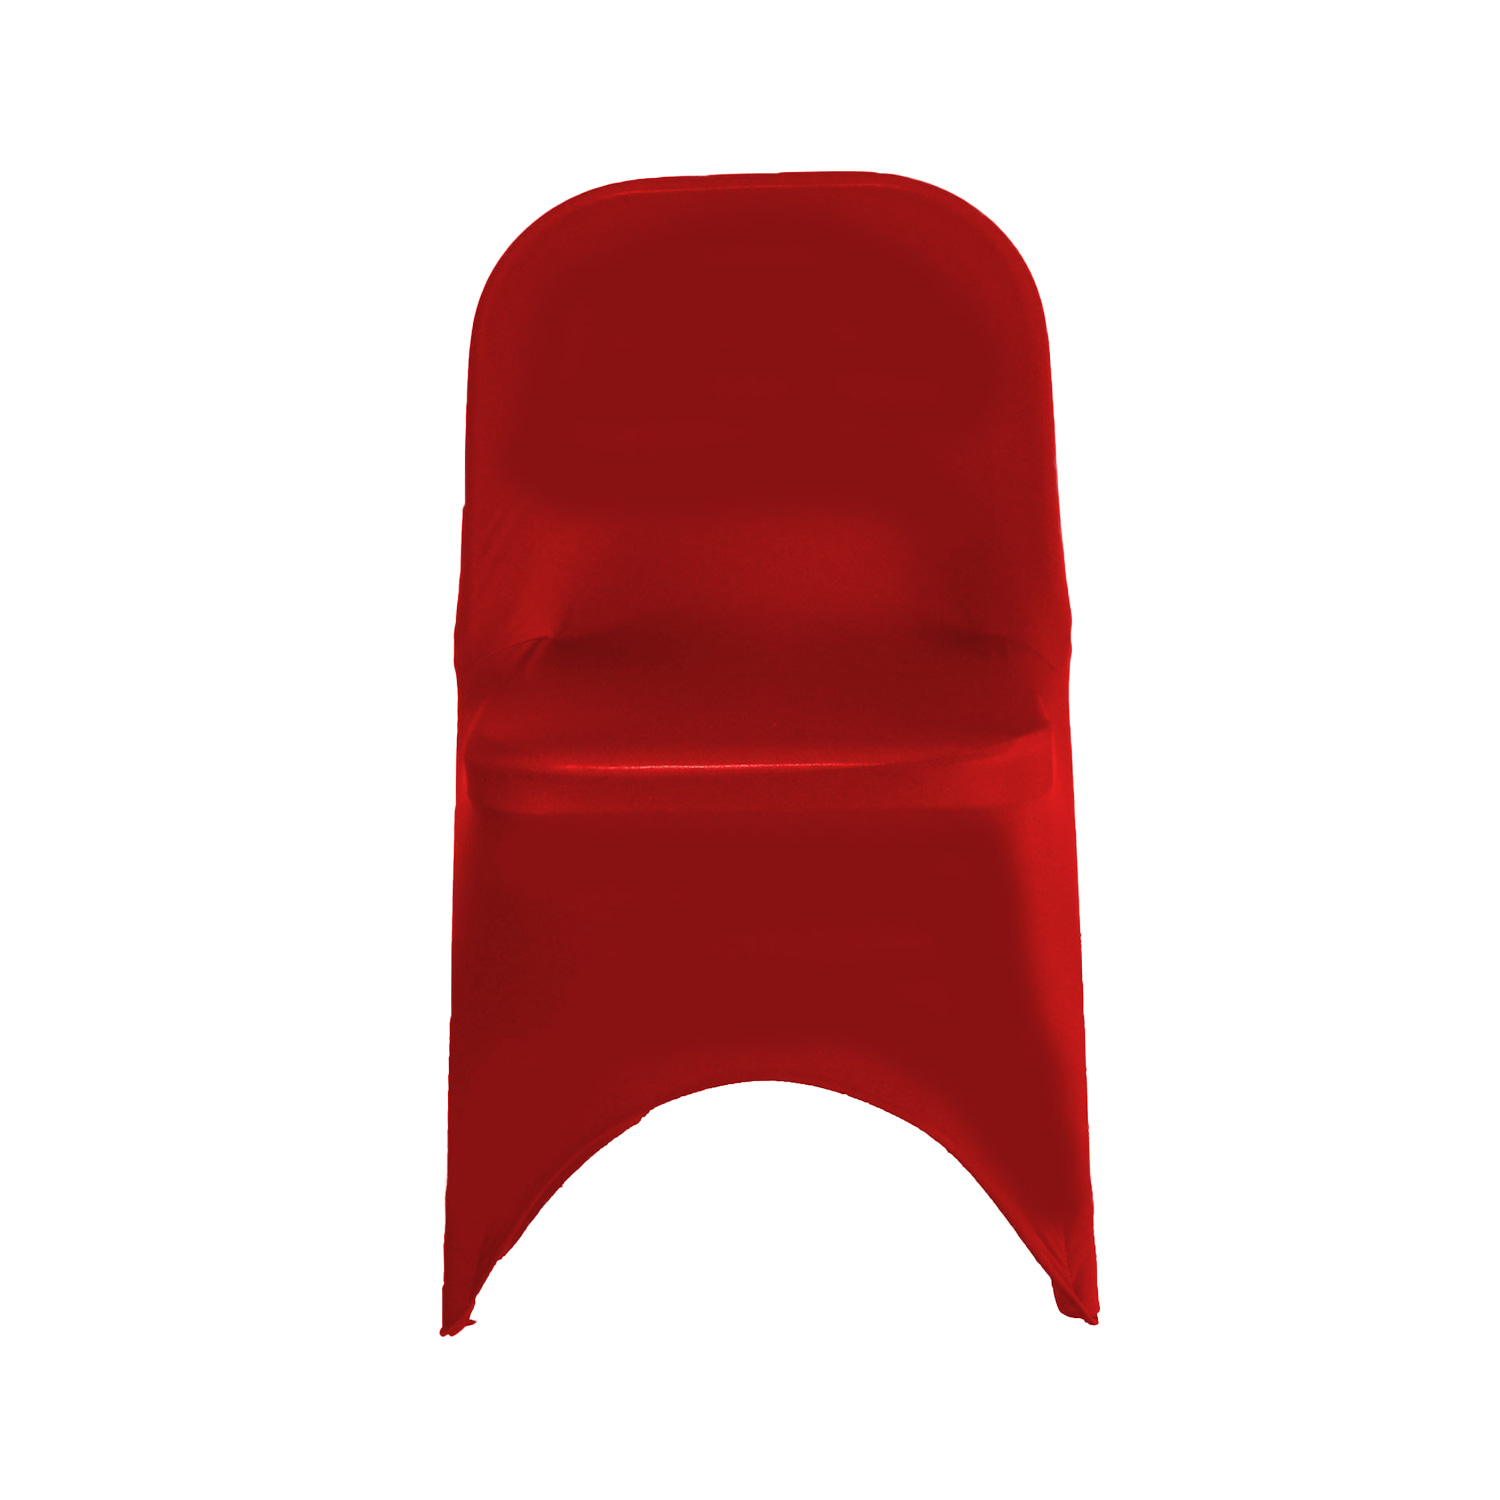 Your Chair Covers - Spandex Folding Chair Cover Red for Wedding, Party, Birthday, Patio, etc. - image 3 of 5